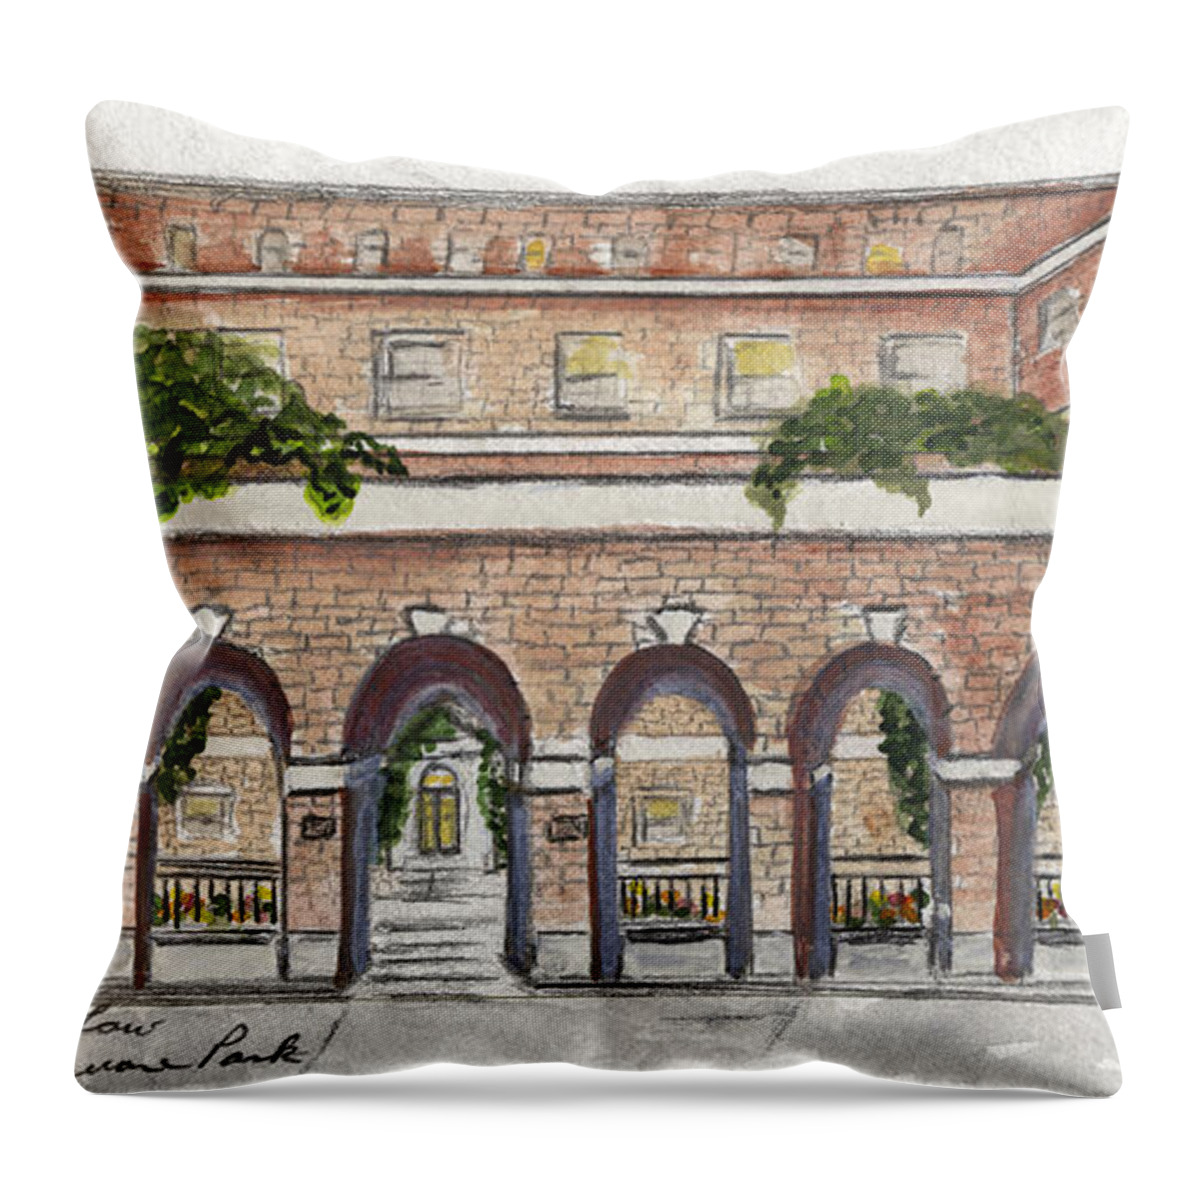 Nyu Law School Throw Pillow featuring the painting The NYU Law School by AFineLyne